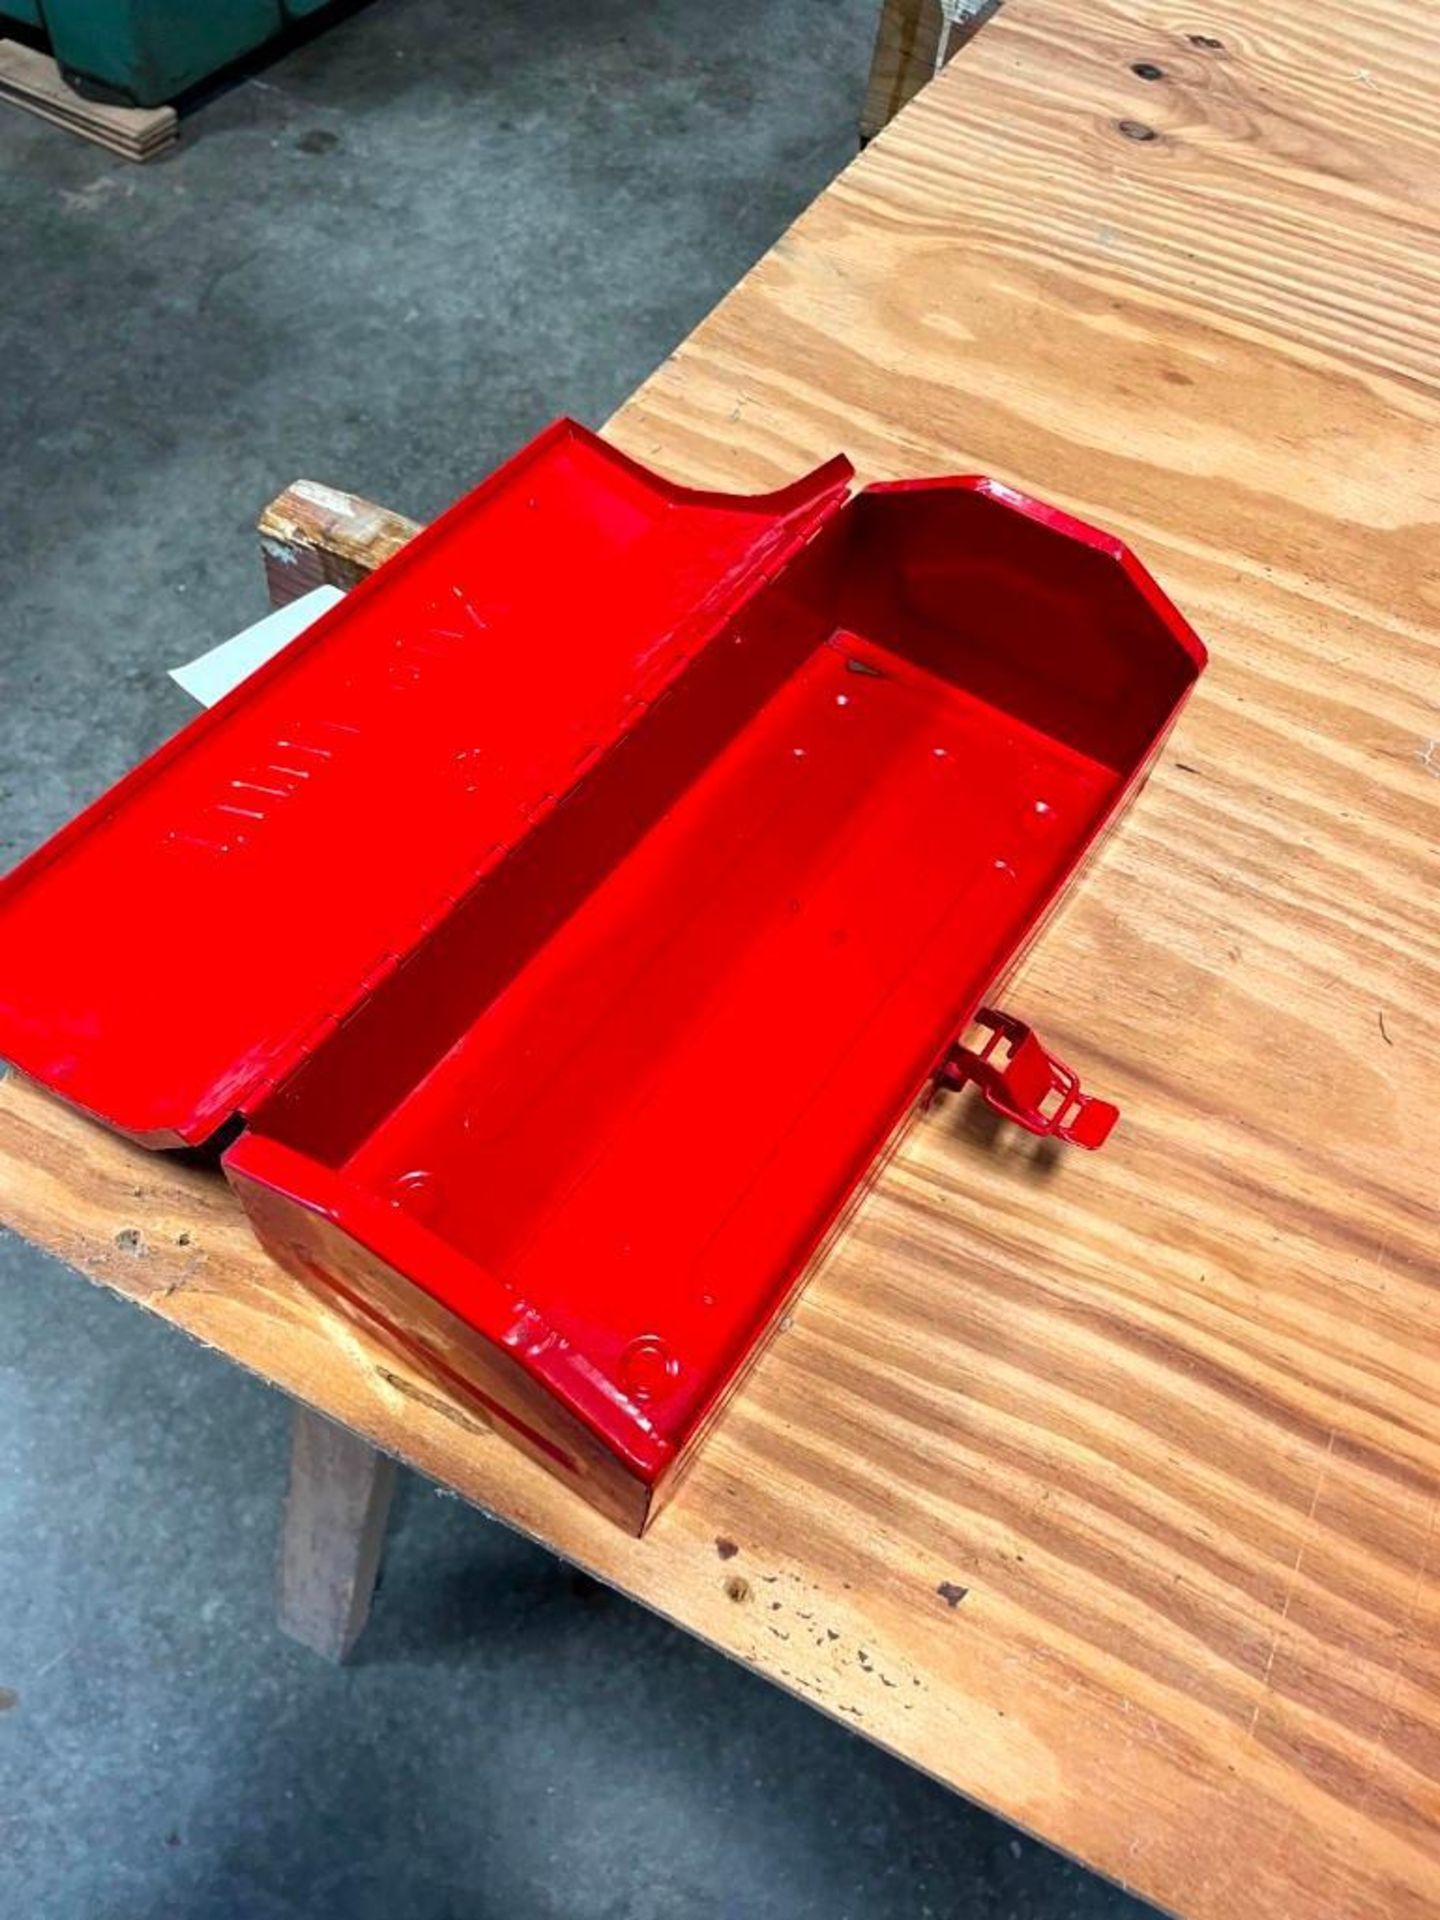 RED TOOL BOX - Image 2 of 2